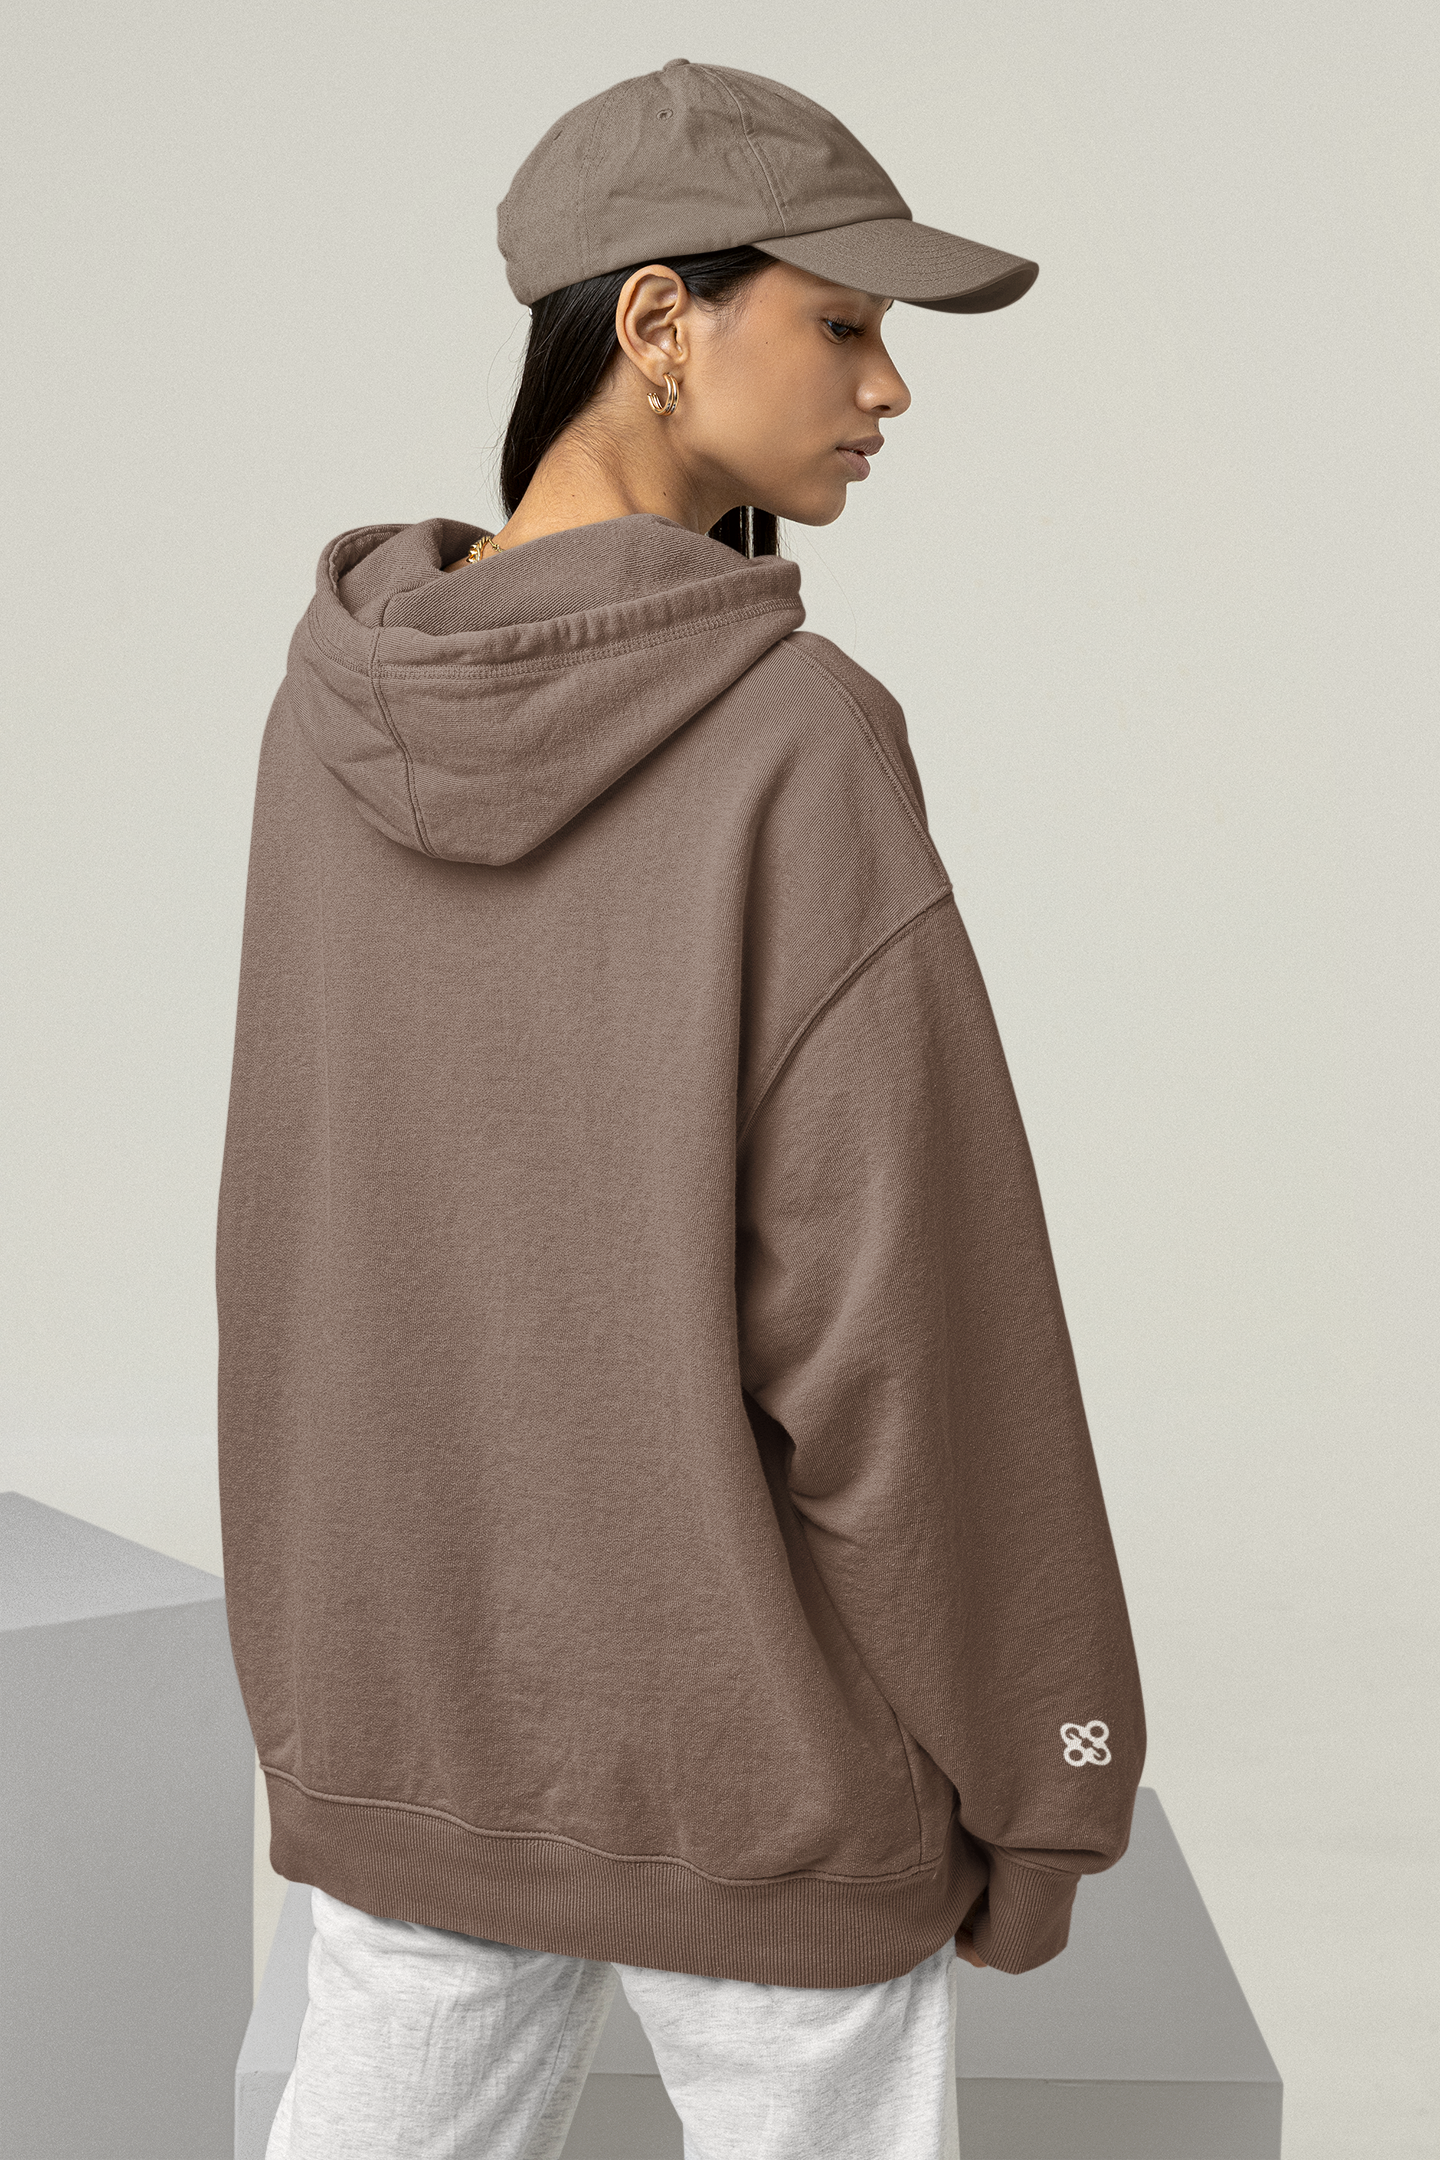 VOGUEORGY ESSENTIAL OVERSIZED HOODIE